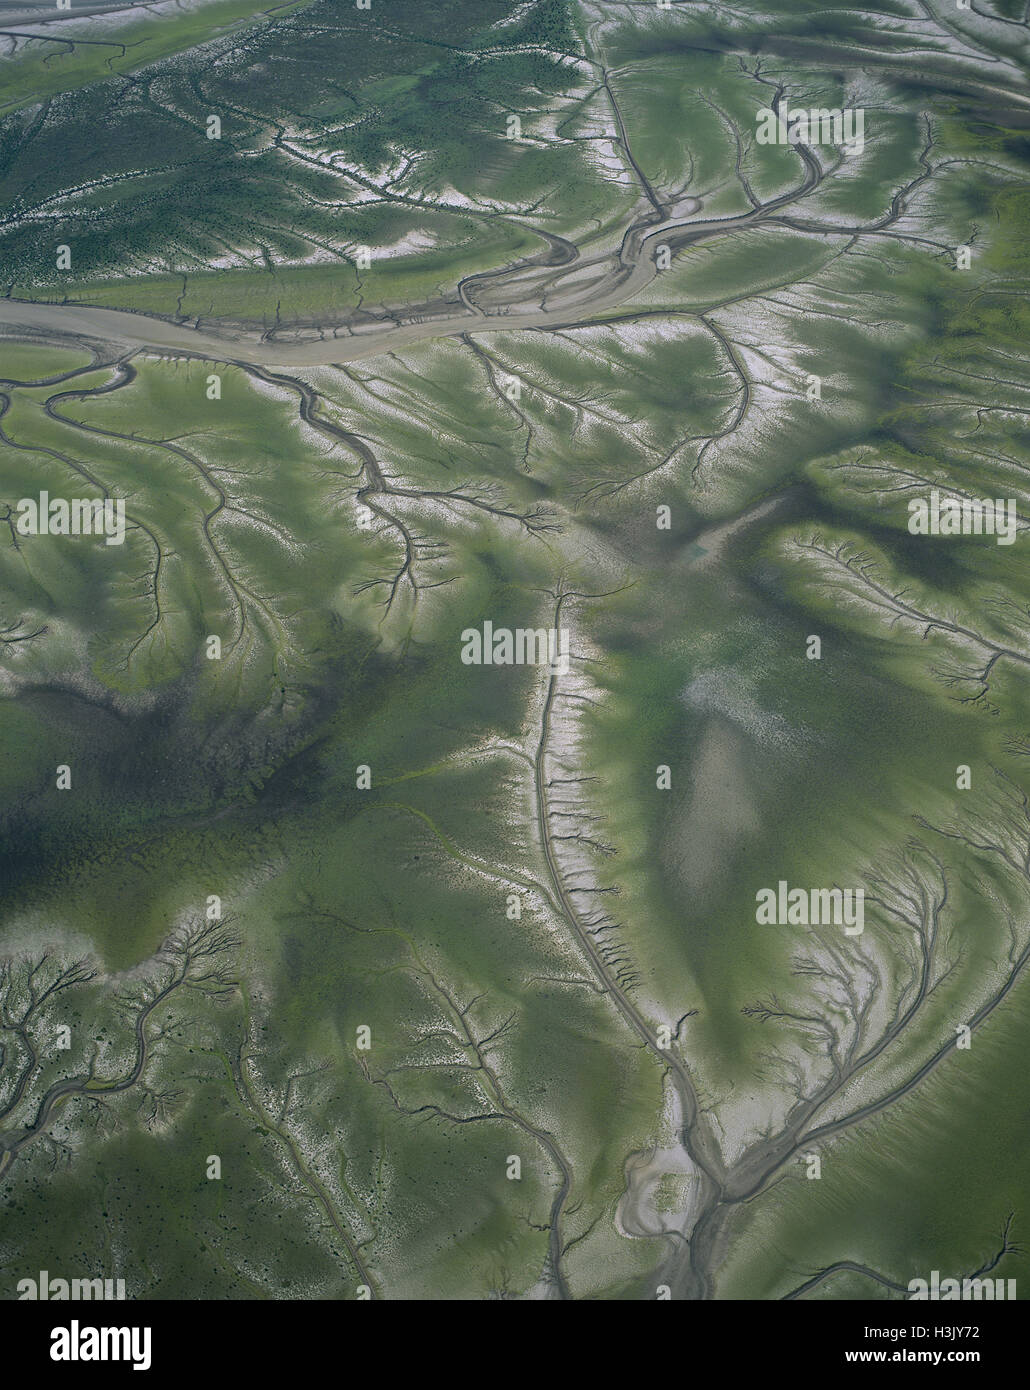 Tidal flats and dendritic drainage channels, Stock Photo